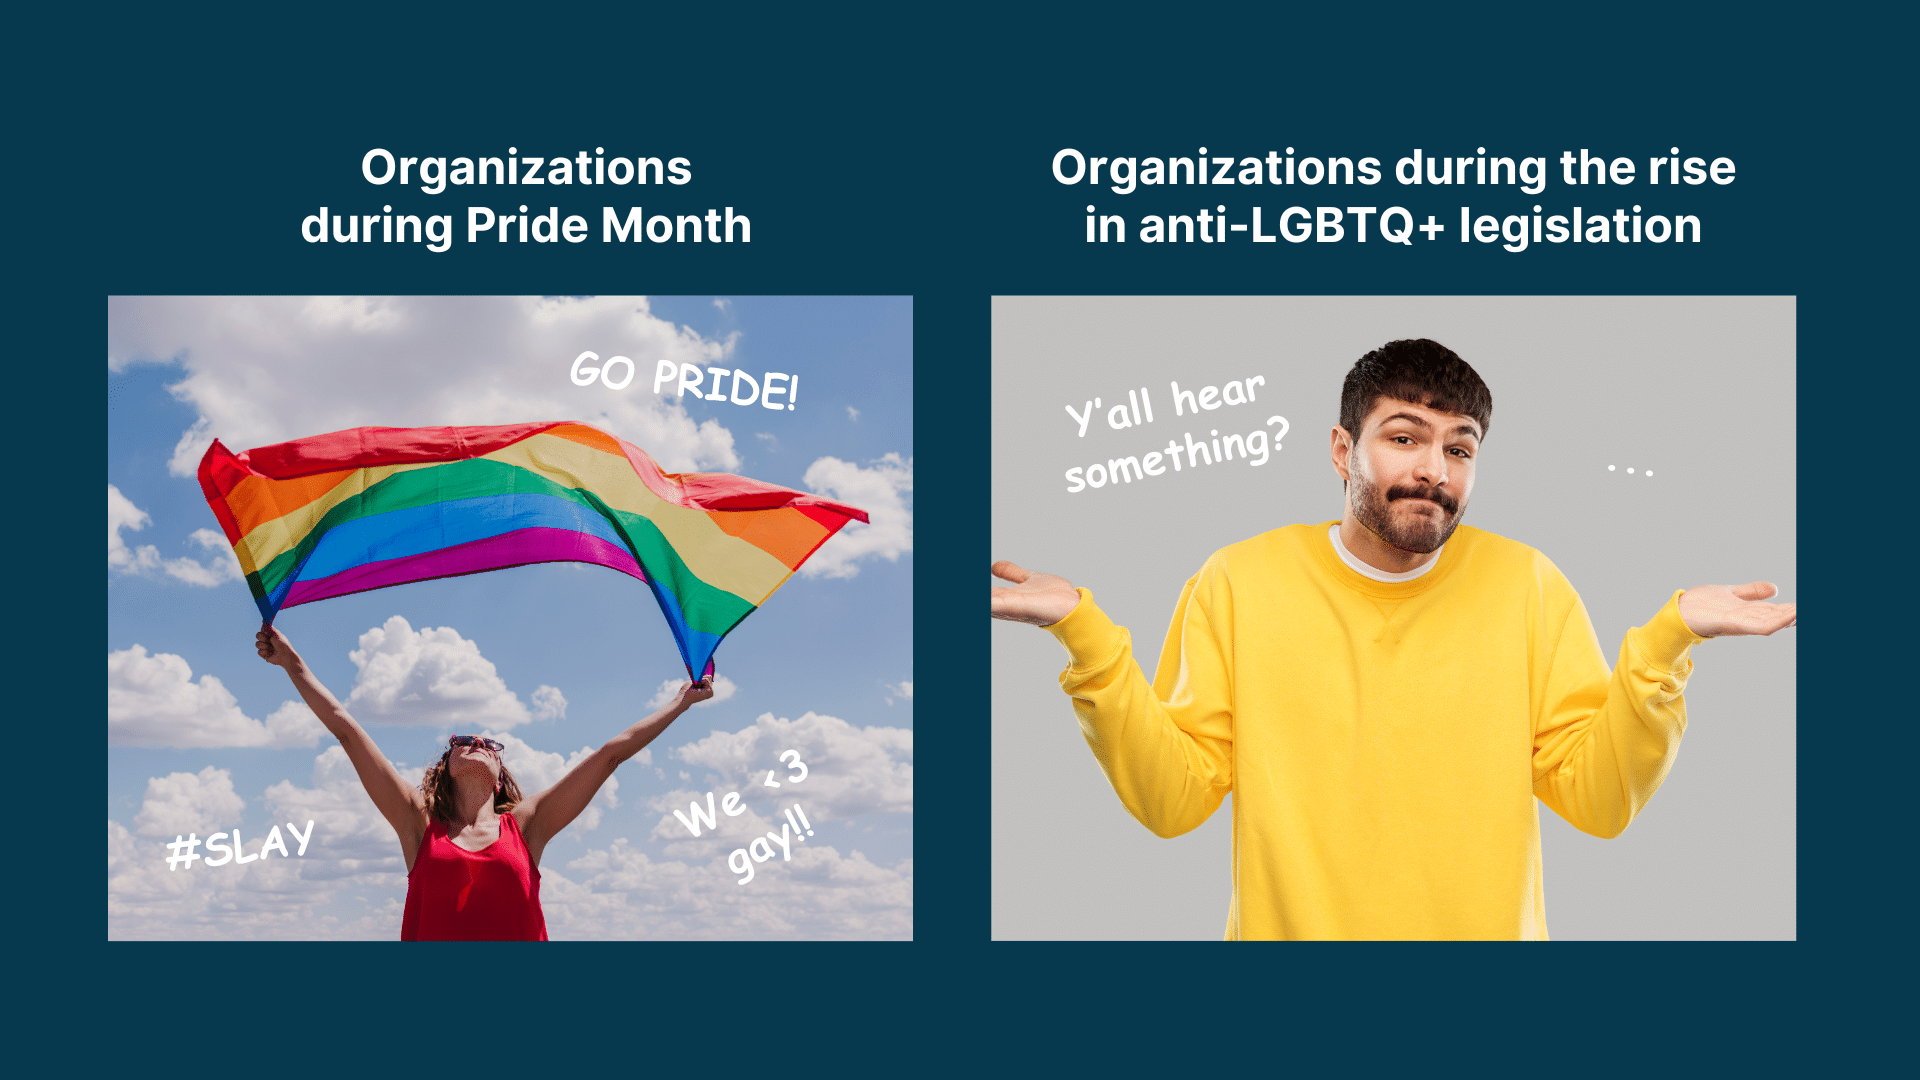 Meme showing two image. One labeled "Organizations during pride month" with photo of person holding up Pride flag and text reading "Go Pride!". Another photo labeled "Organizations during the rise in anti-LGBTQ+ legislation" with photo of person shrugging and text read "Y'all hear something?"